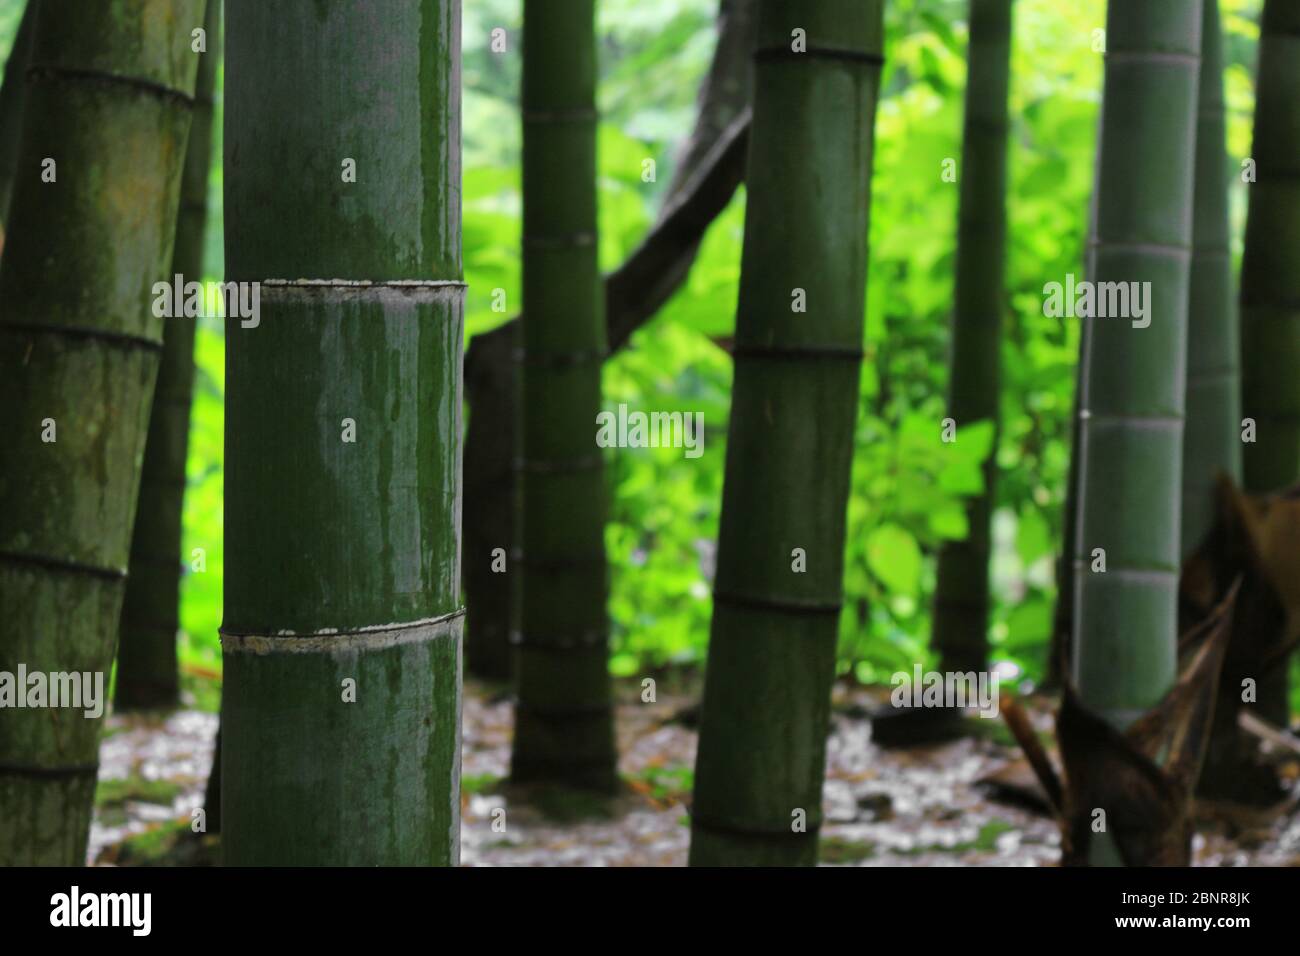 Bamboo forest scenery after the rain Stock Photo